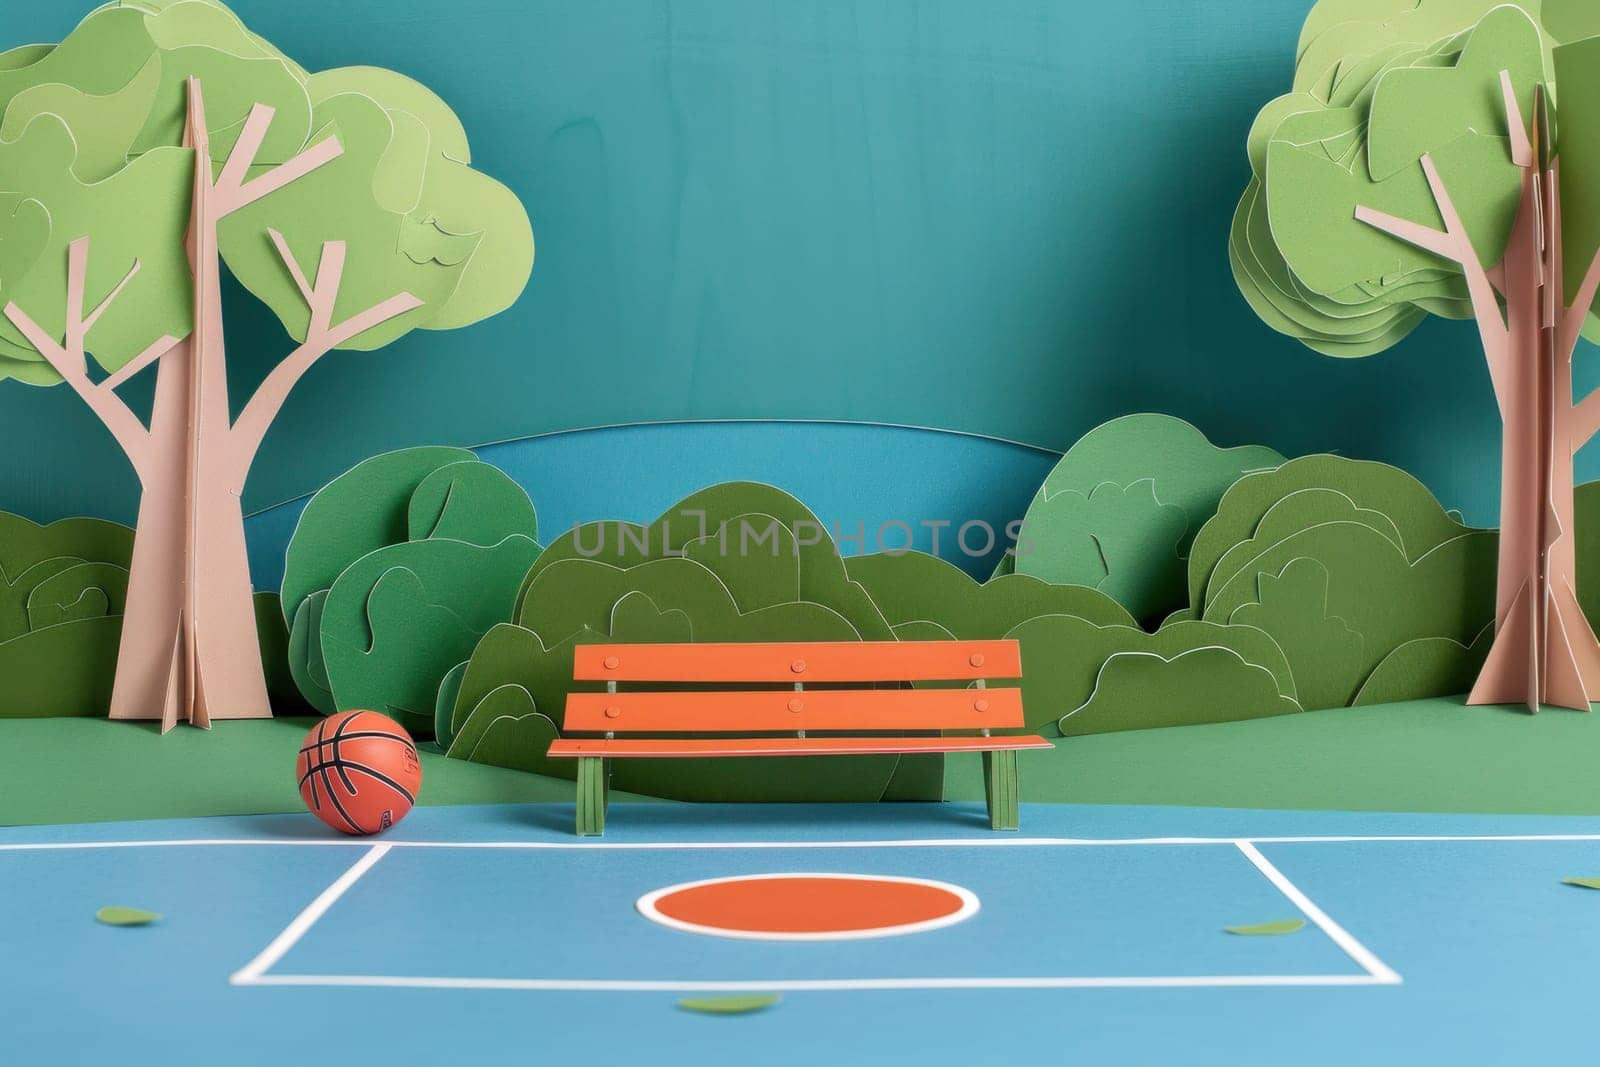 Basketball court landscape with trees, bench, and basketball in a park setting with relaxing vibes by Vichizh